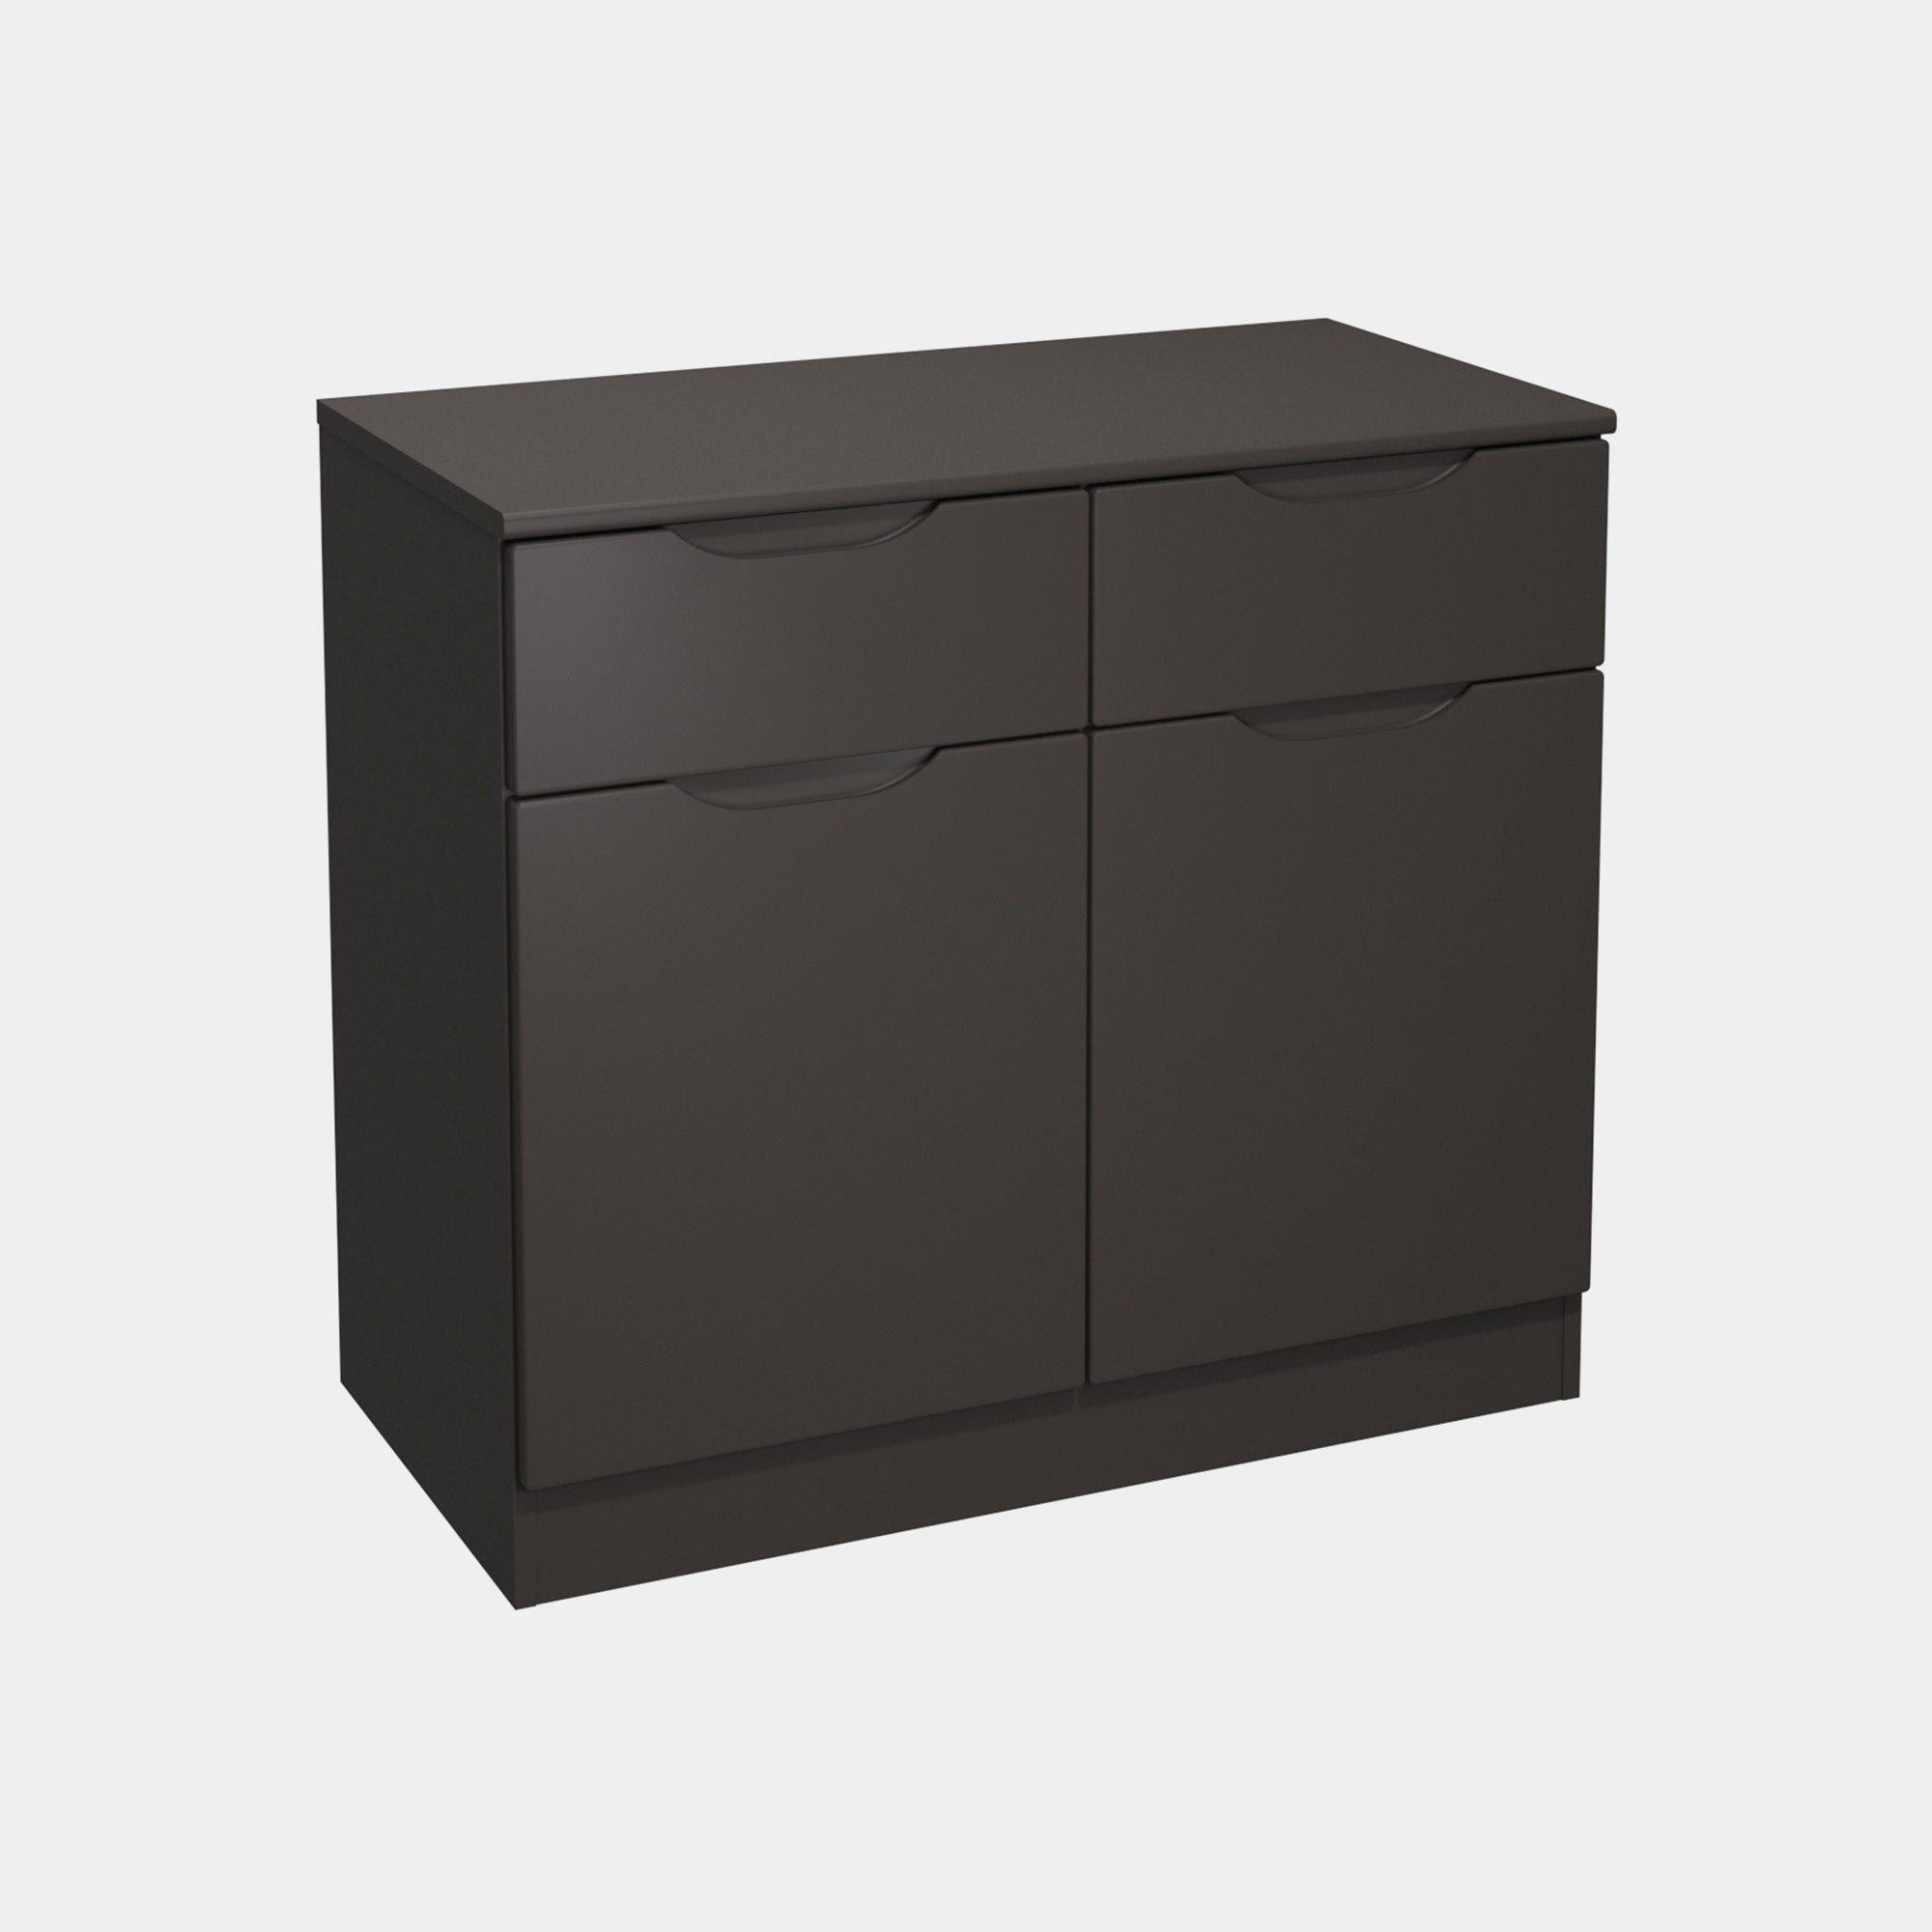 Compact Sideboard in Graphite High Gloss Finish